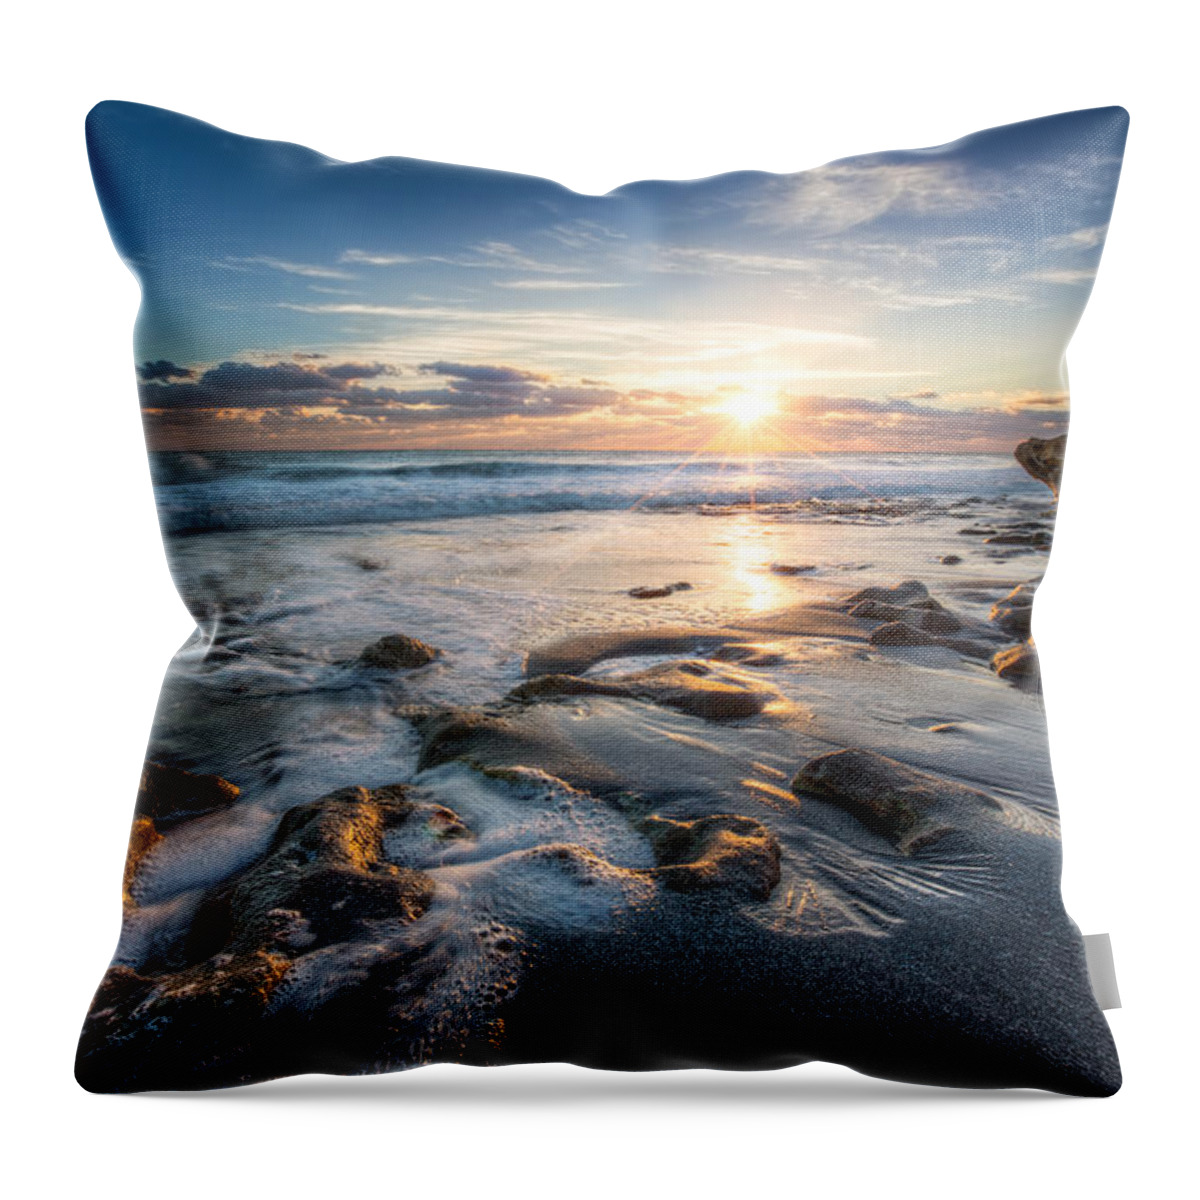 Clouds Throw Pillow featuring the photograph Sun Rays on the Ocean by Debra and Dave Vanderlaan